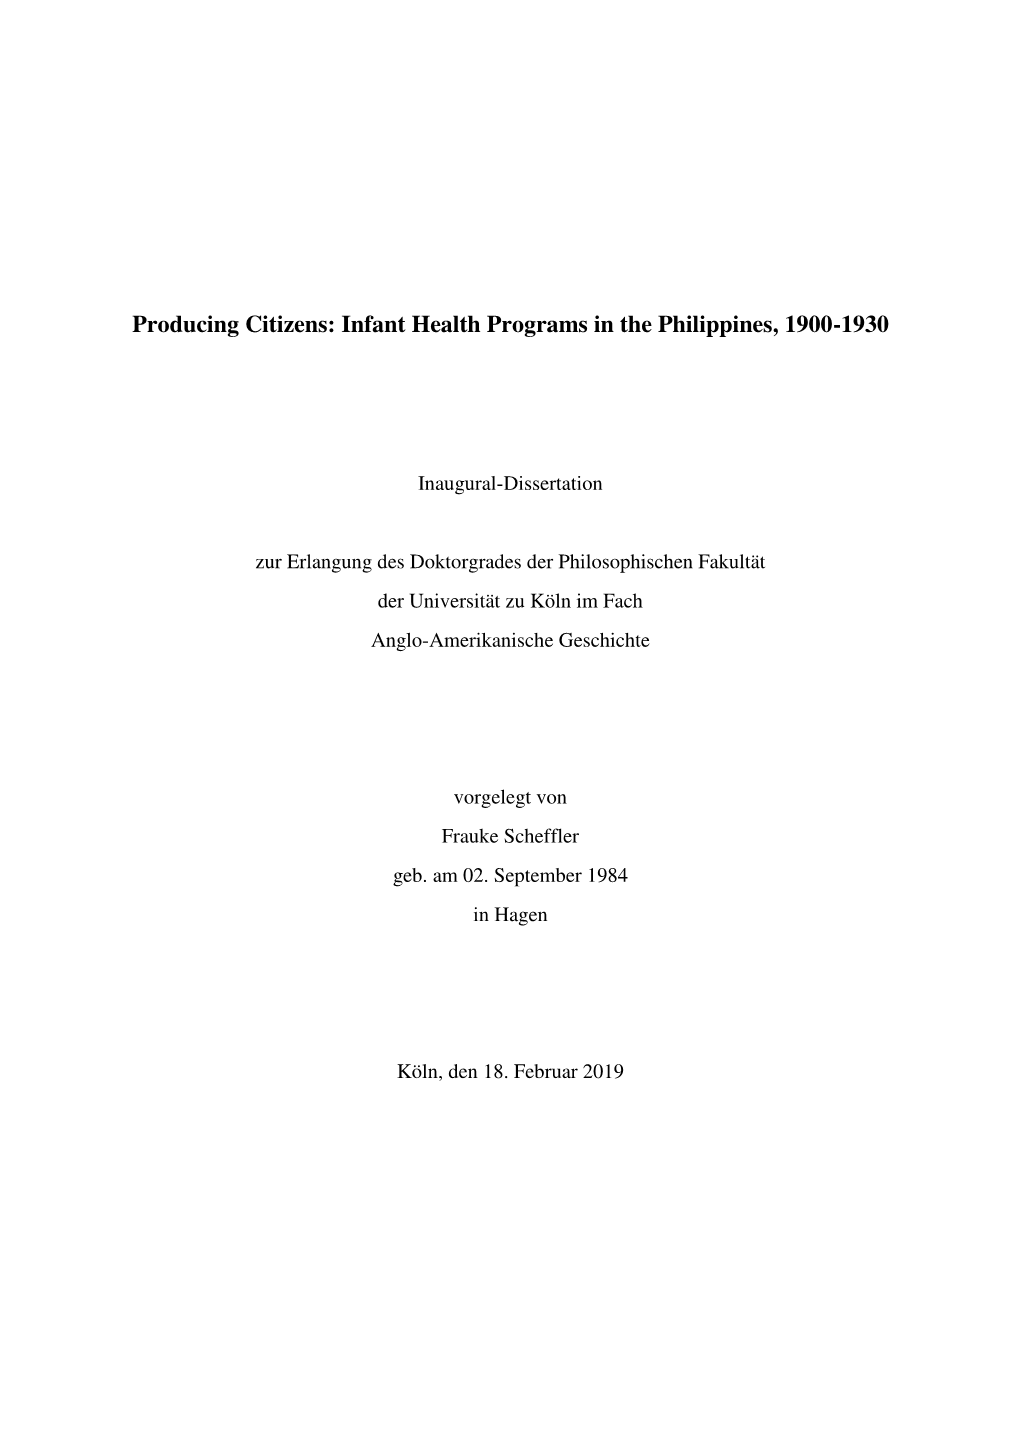 Infant Health Programs in the Philippines, 1900-1930